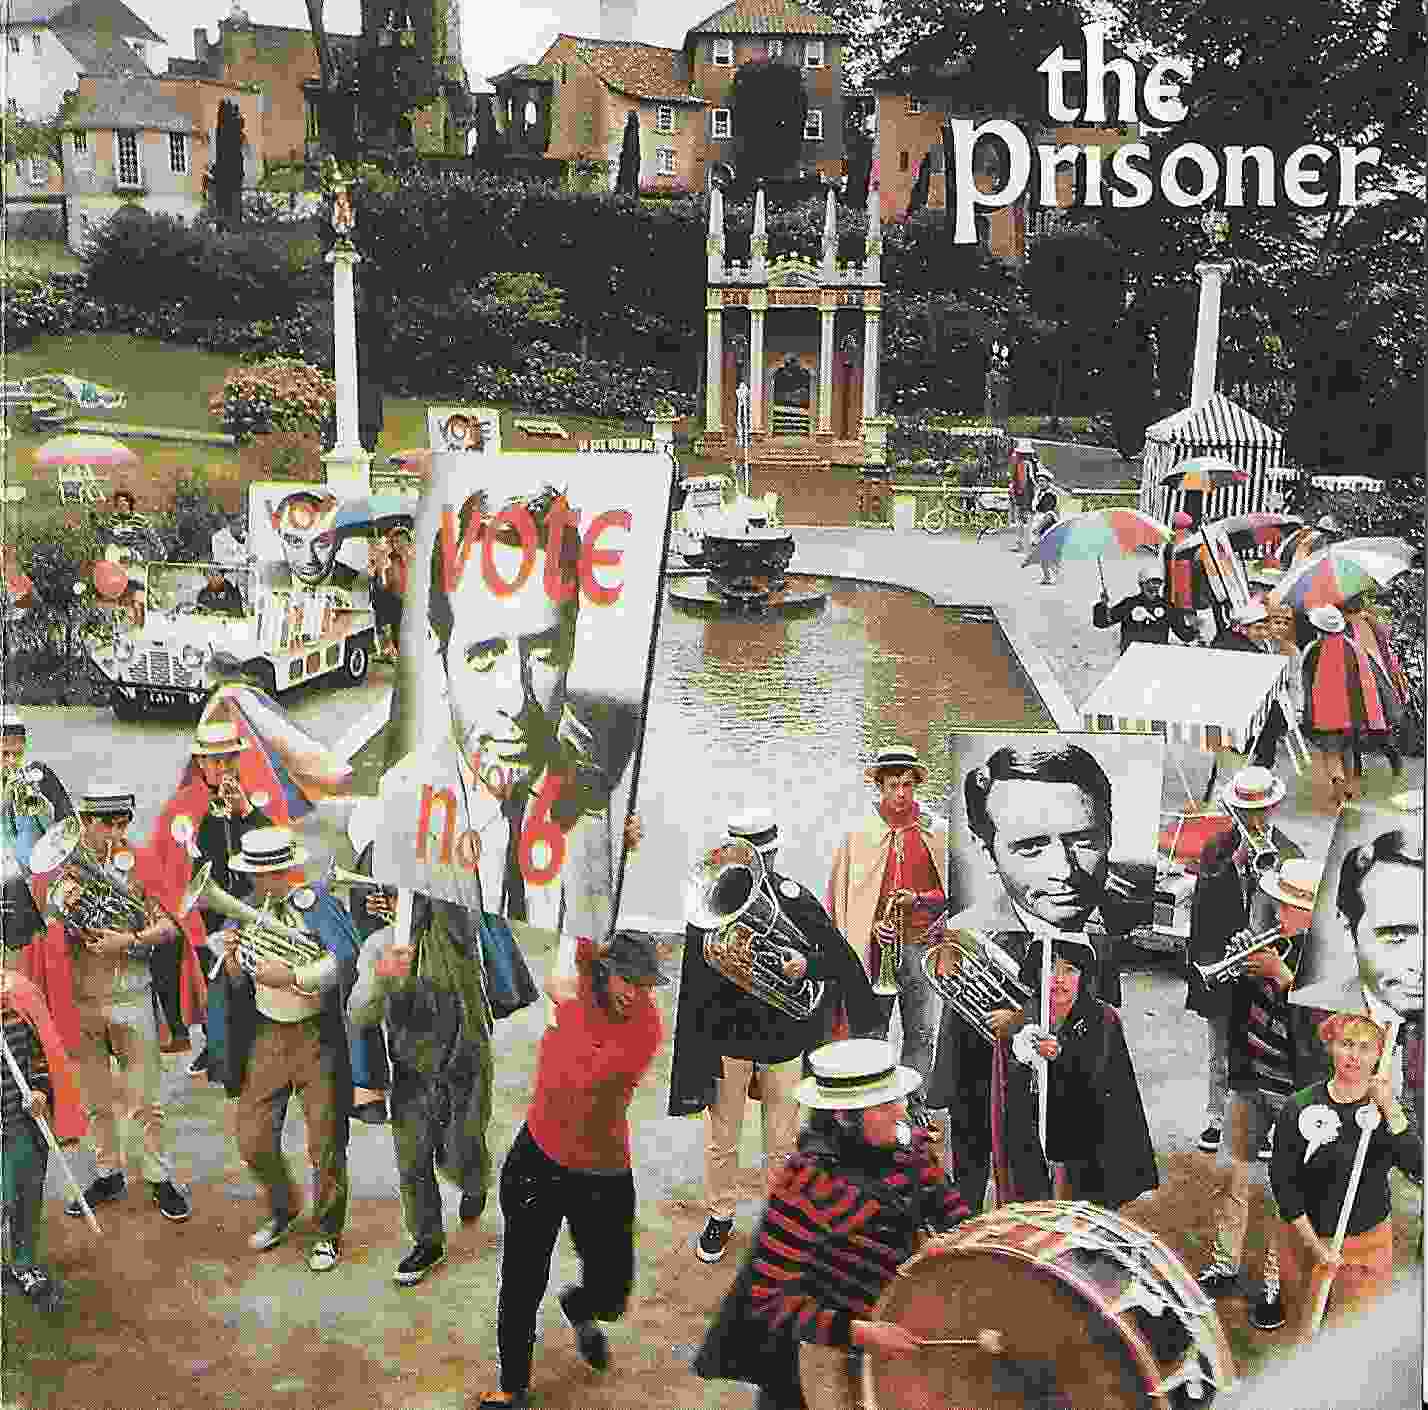 Picture of The prisoner by artist Various from ITV, Channel 4 and Channel 5 cds library